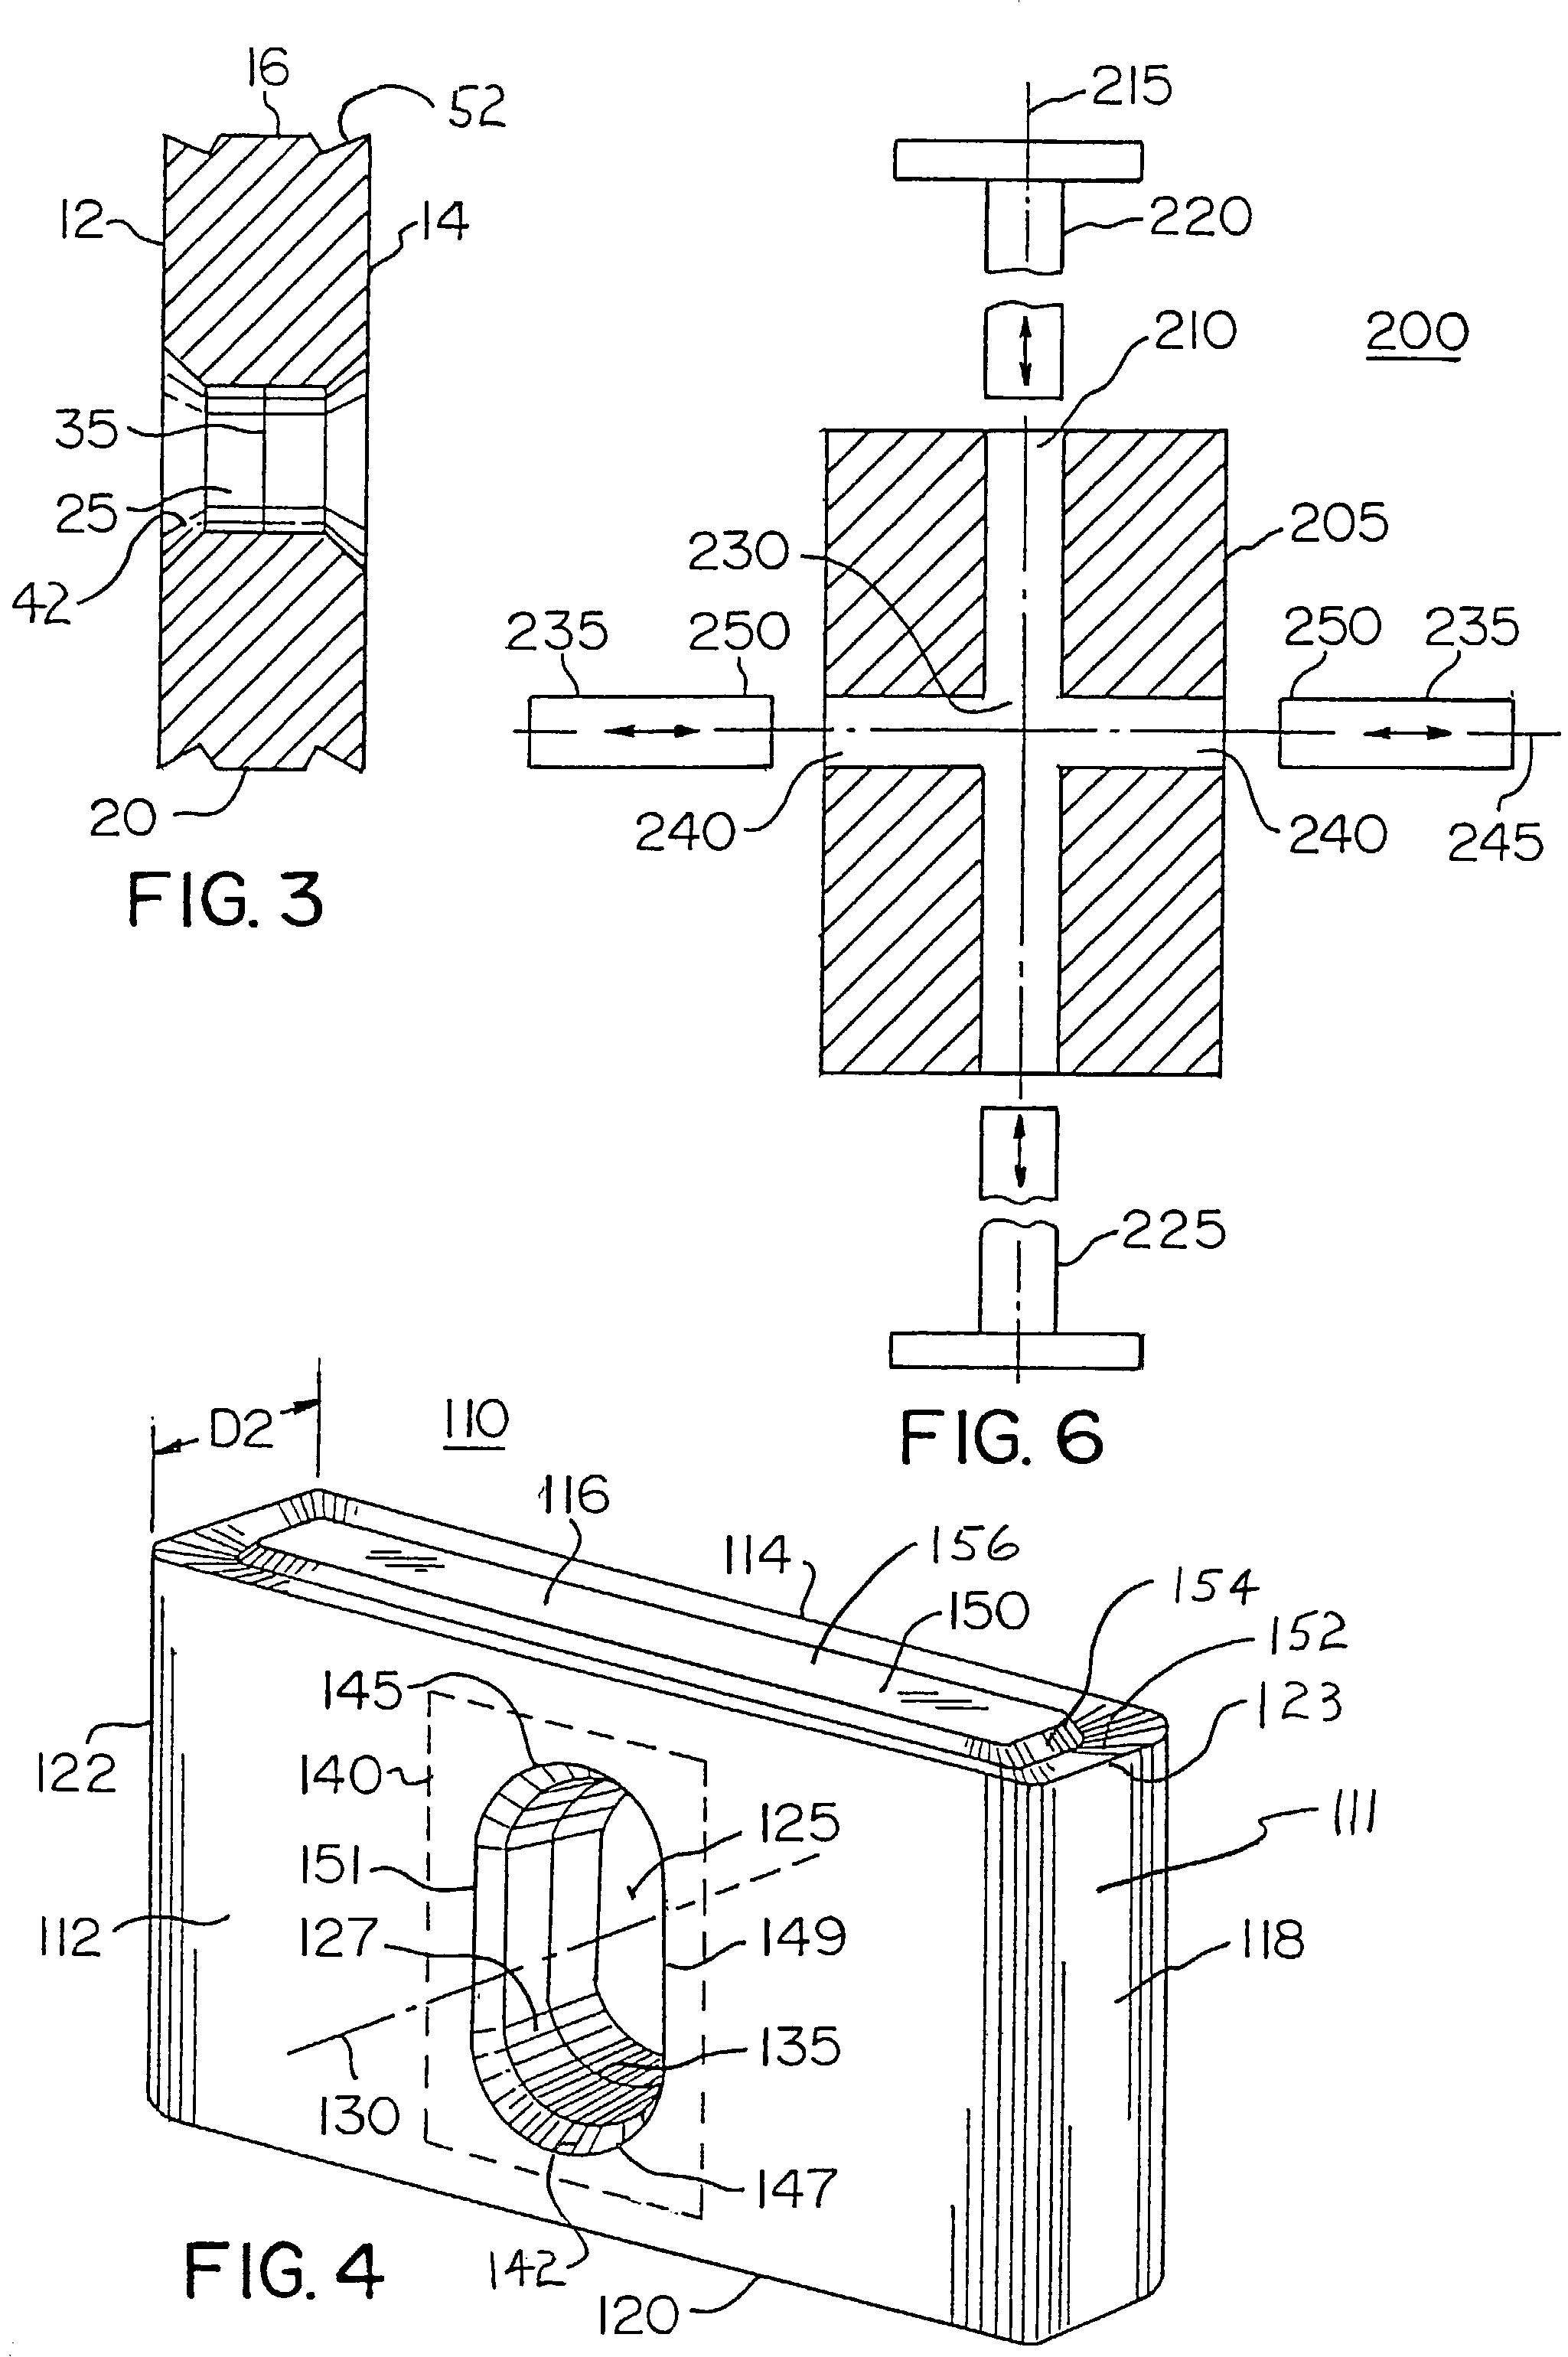 Method and apparatus for cross-hole pressing to produce cutting inserts